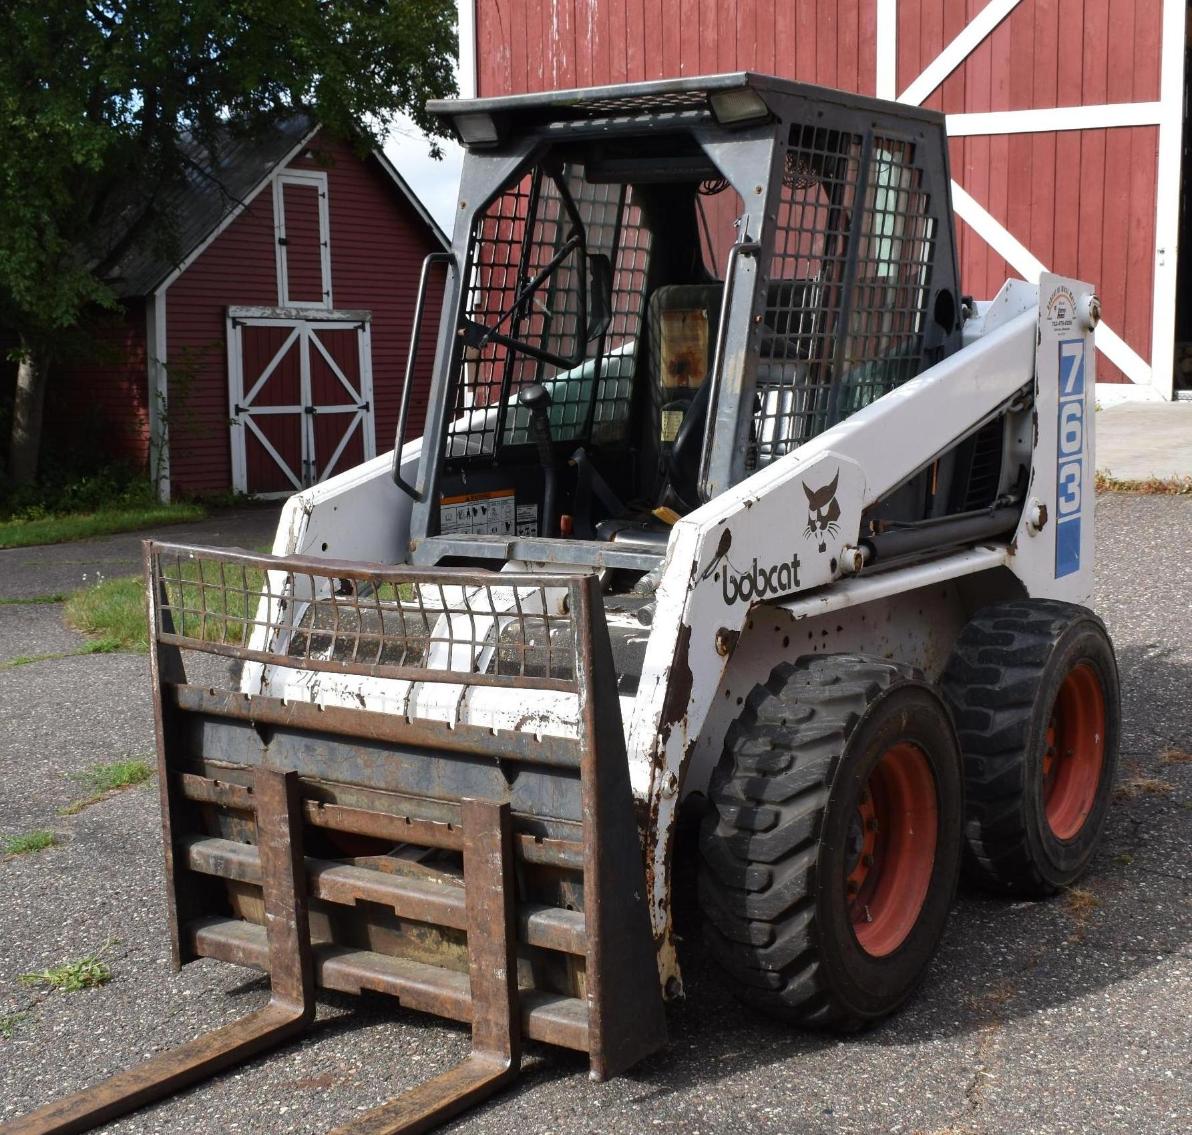 Bobcat 763 Skid Steer, Ford 1510 4X4 Diesel Tractor, Attachments, Shop Tools & Household